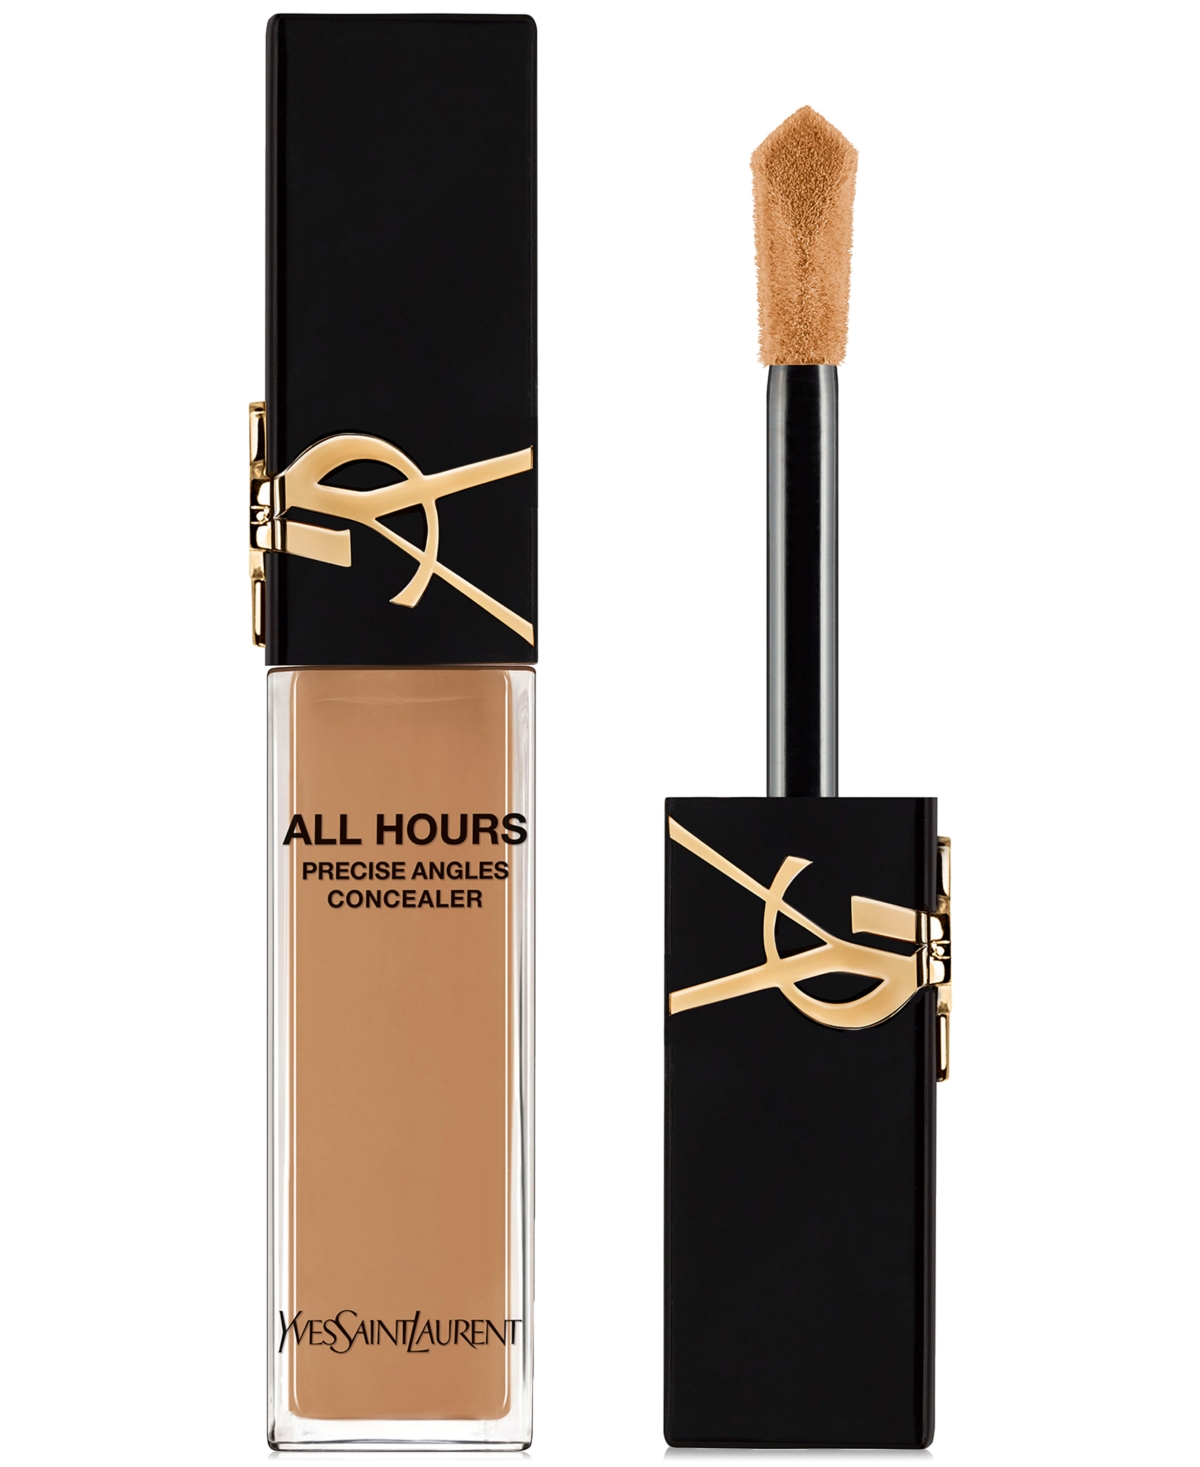 Saint Laurent All Hours Precise Angles Full-coverage Concealer In Medium Shade With Warm Undertones